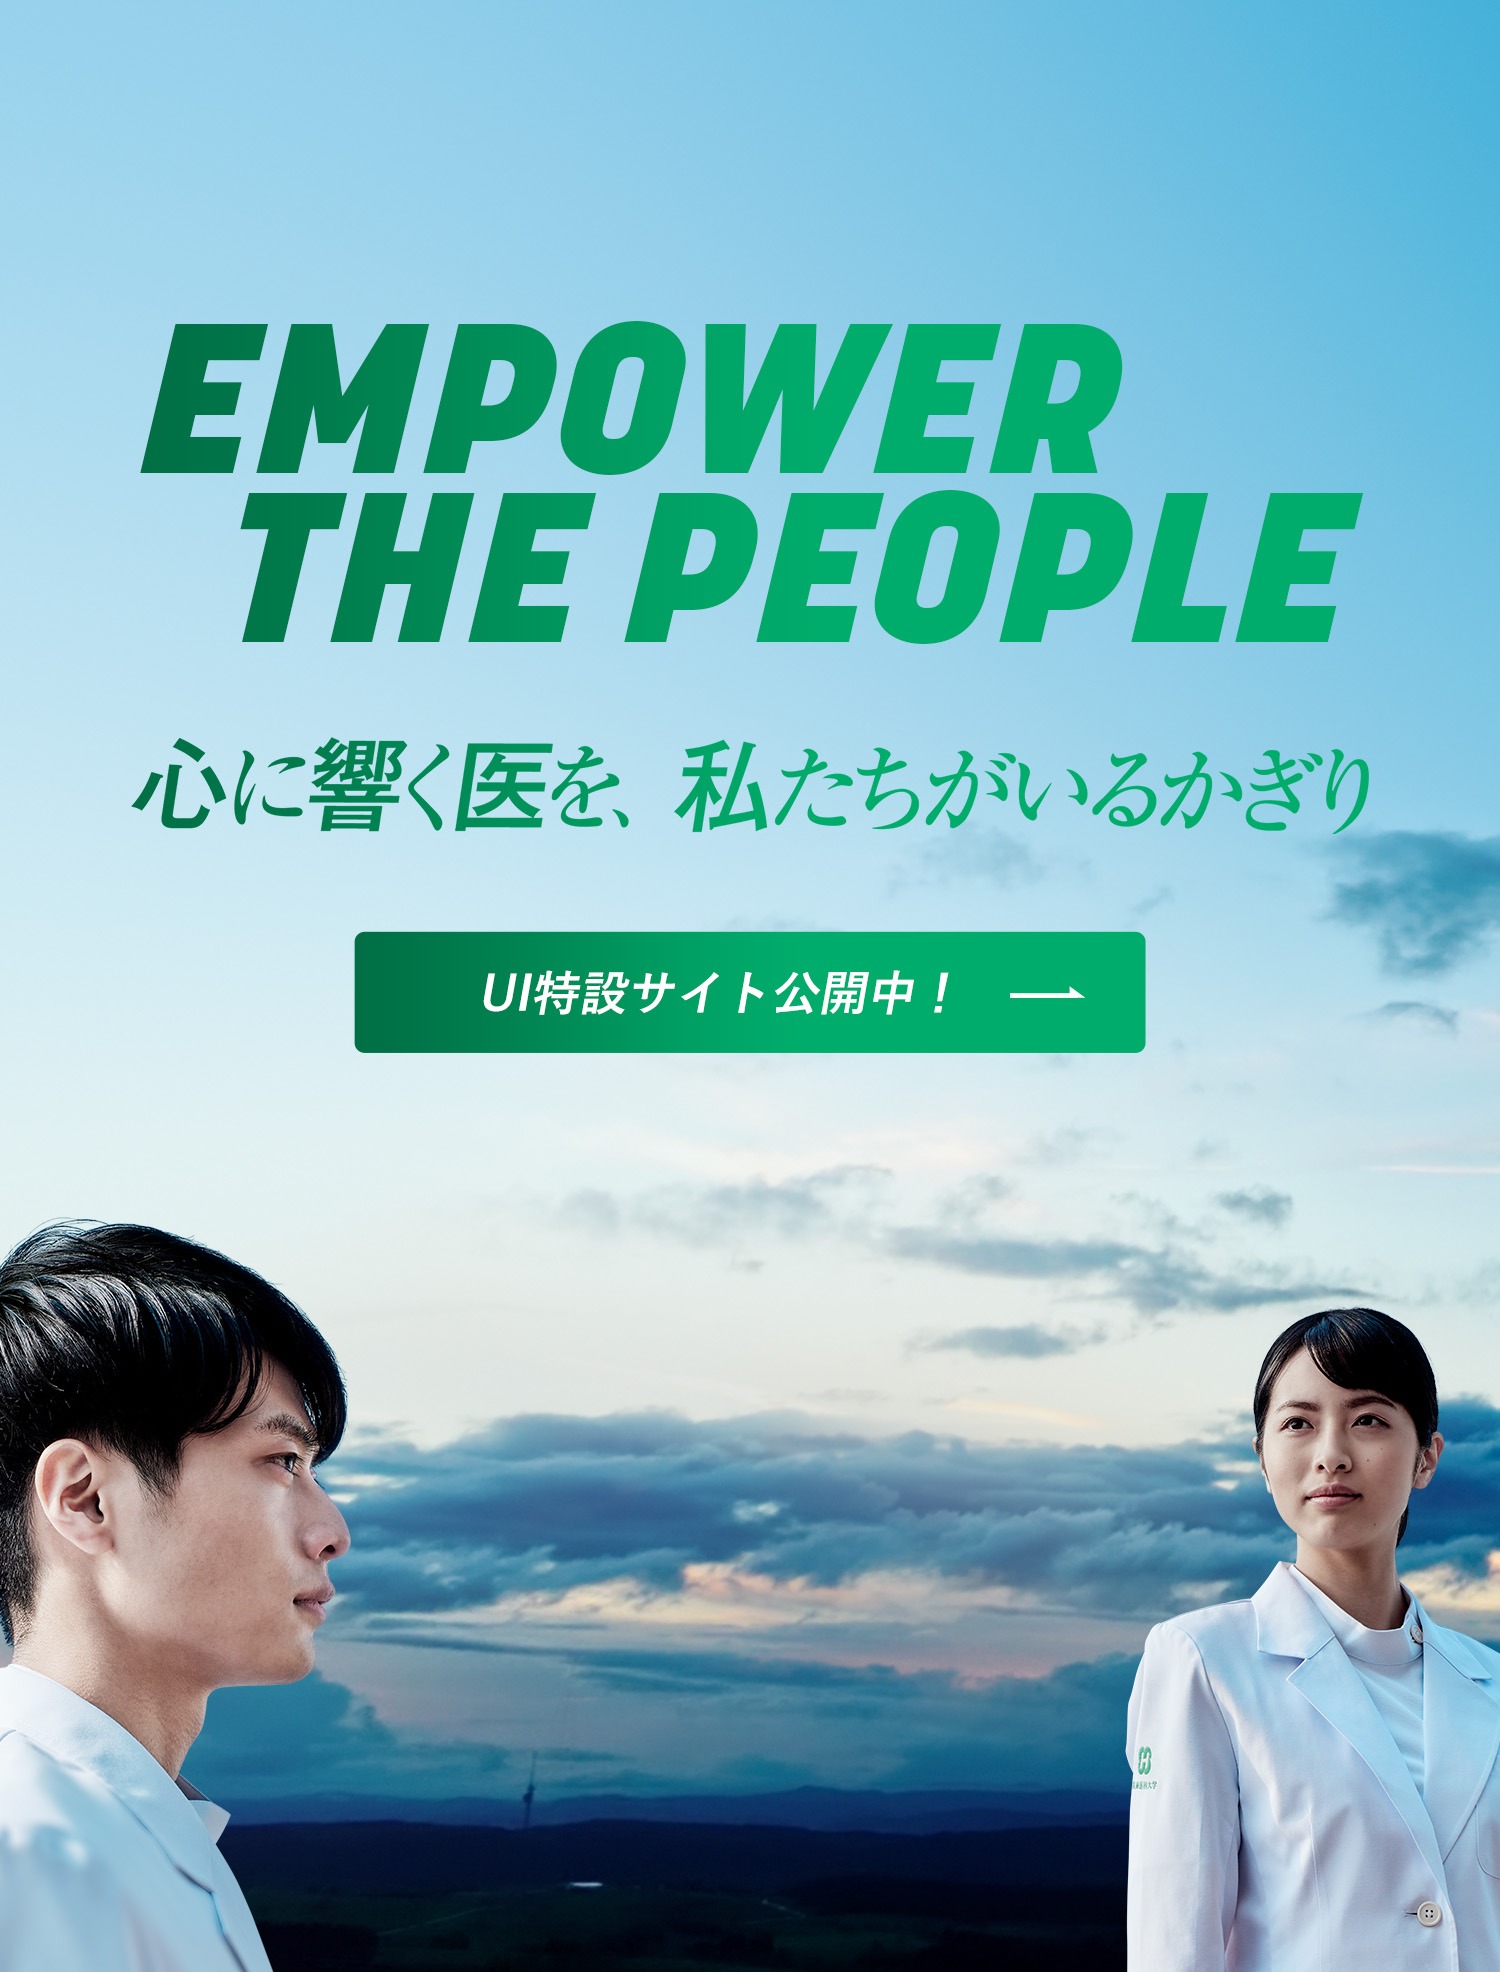 EMPOWER THE PEOPLE